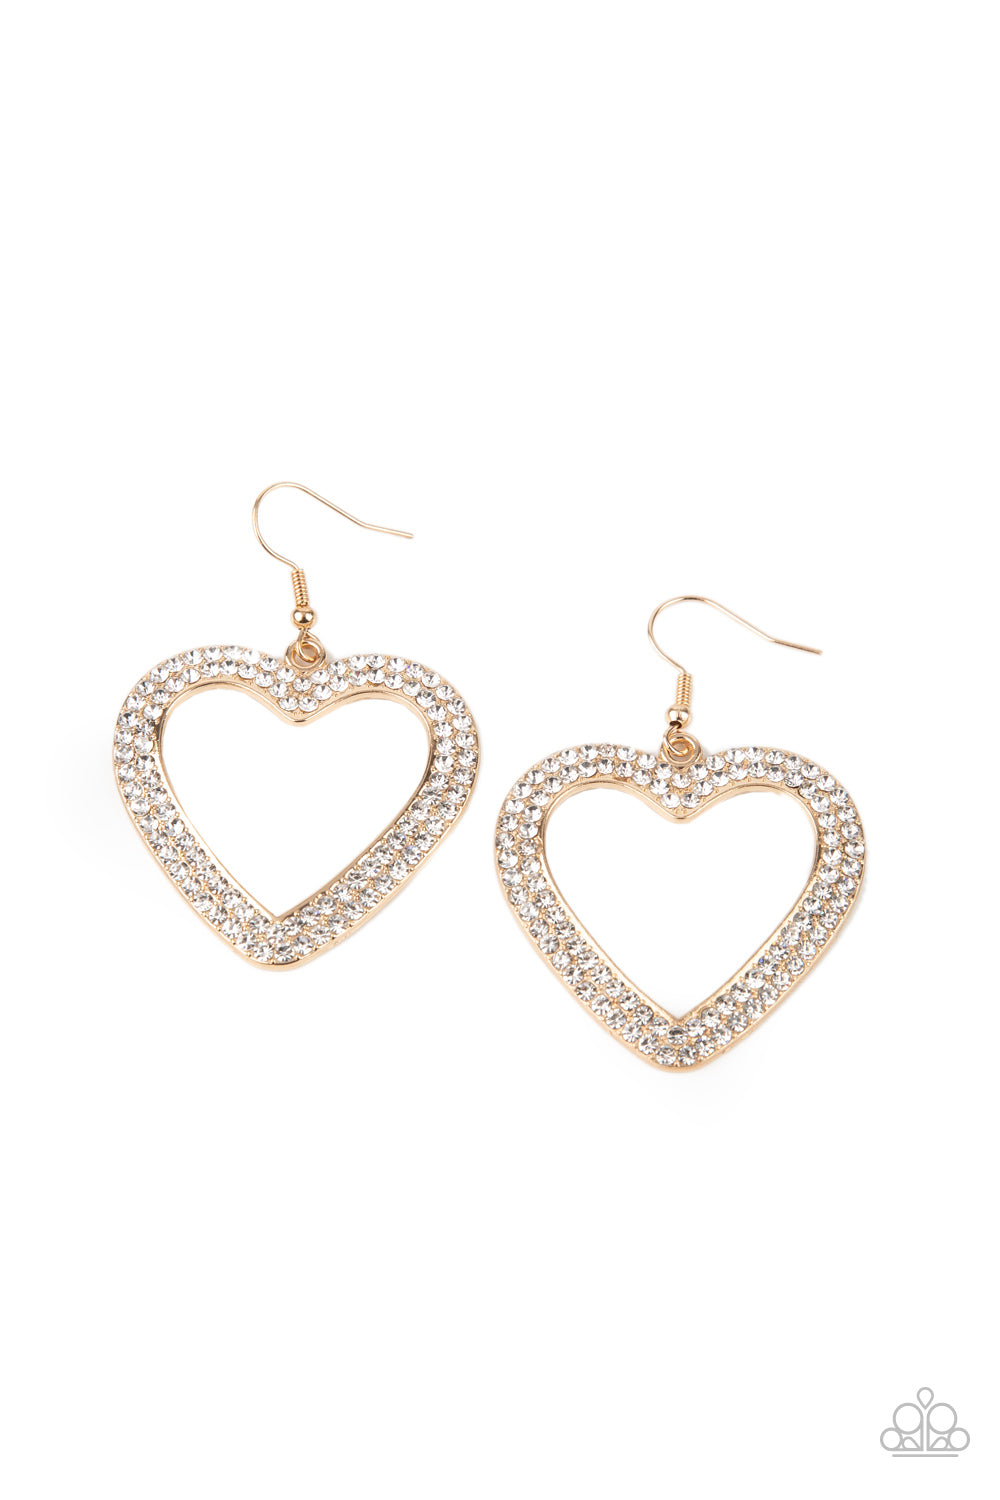 Paparazzi earrings, glassy white rhinestones are encrusted along the front of a gold heart frame, creating a flirty centerpiece